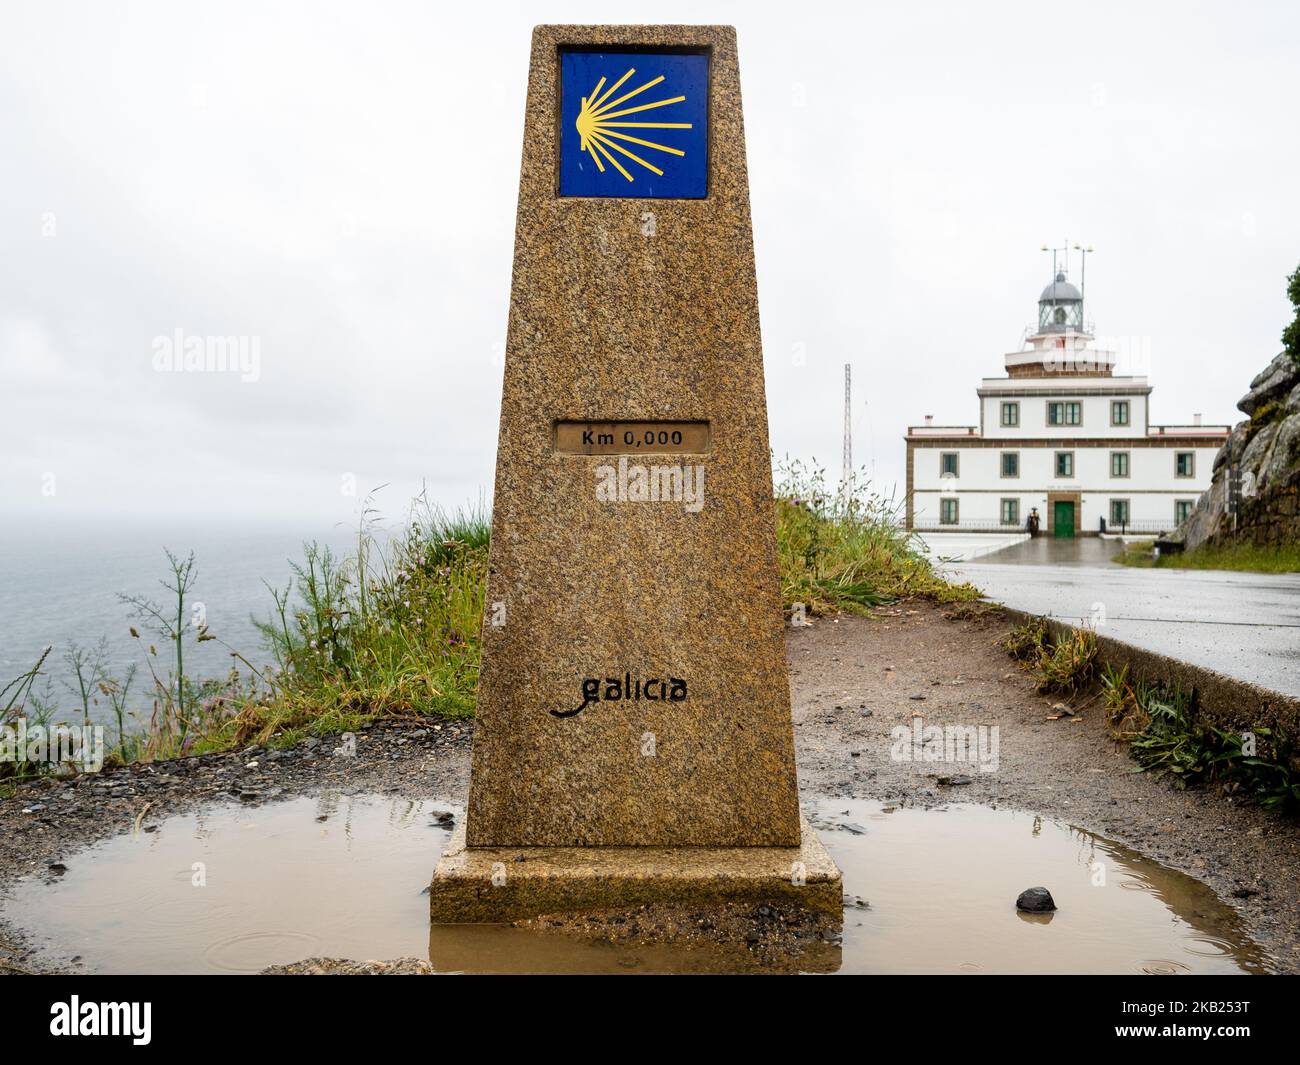 The Camino de Fisterra or Finisterre Camino is a unique route from Santiago to Cape Fisterra, believed to be the ‘Edge of the World’. This is the only trail starting in Santiago de Compostela and takes pilgrims West to the stunning Atlantic coast of Galicia. (Photo by Romy Arroyo Fernandez/NurPhoto) Stock Photo